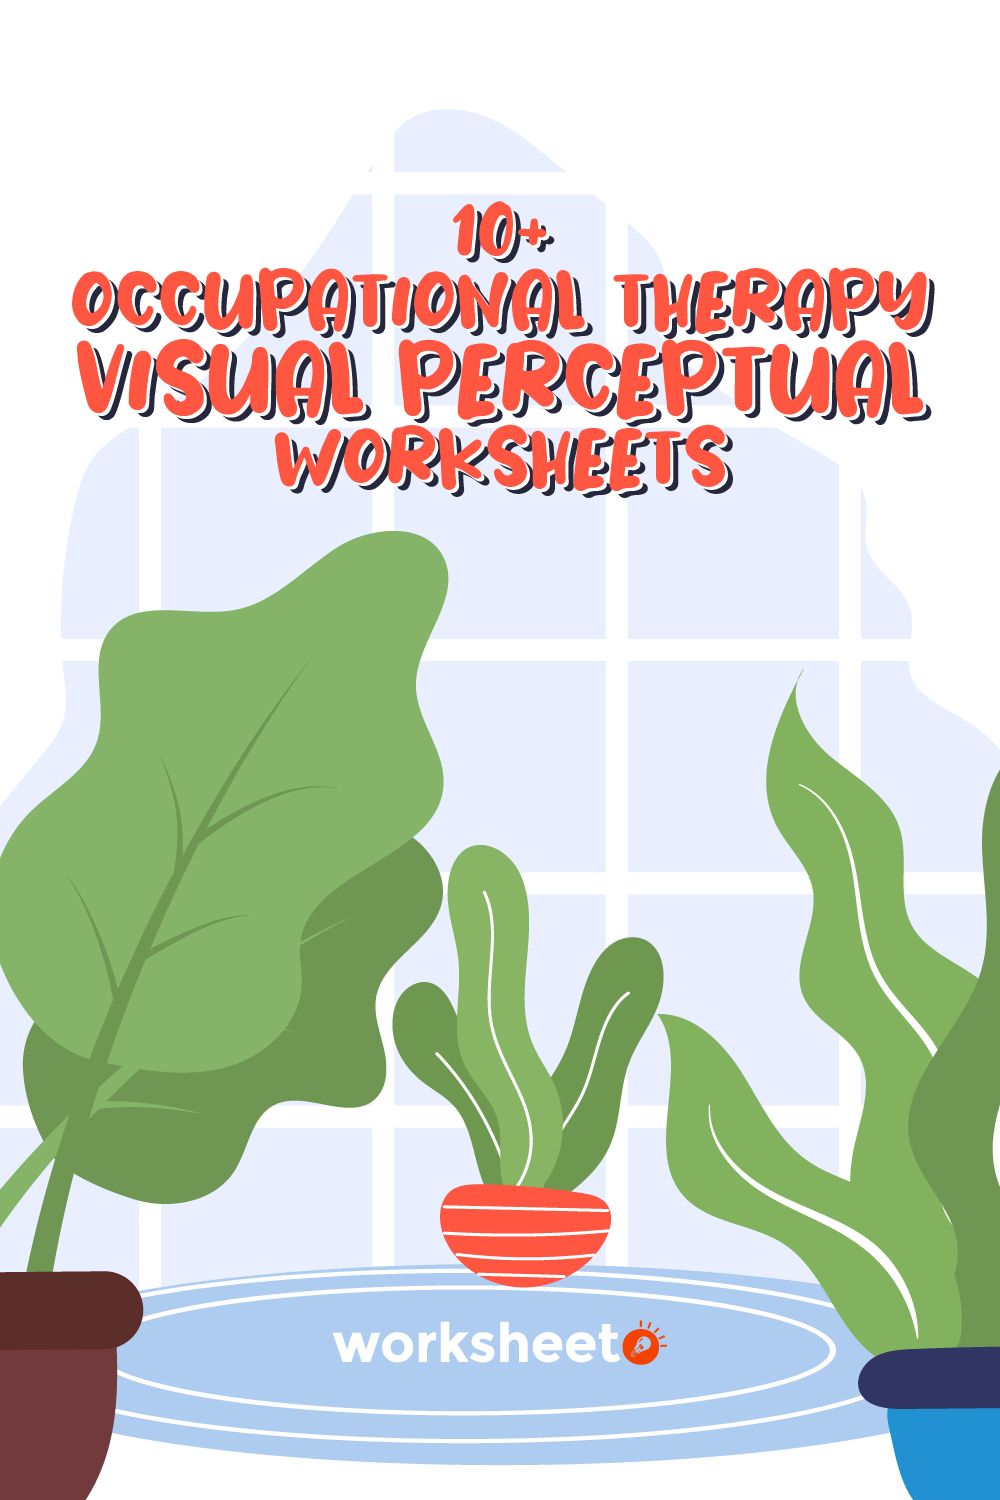 19 Images of Occupational Therapy Visual Perceptual Worksheets